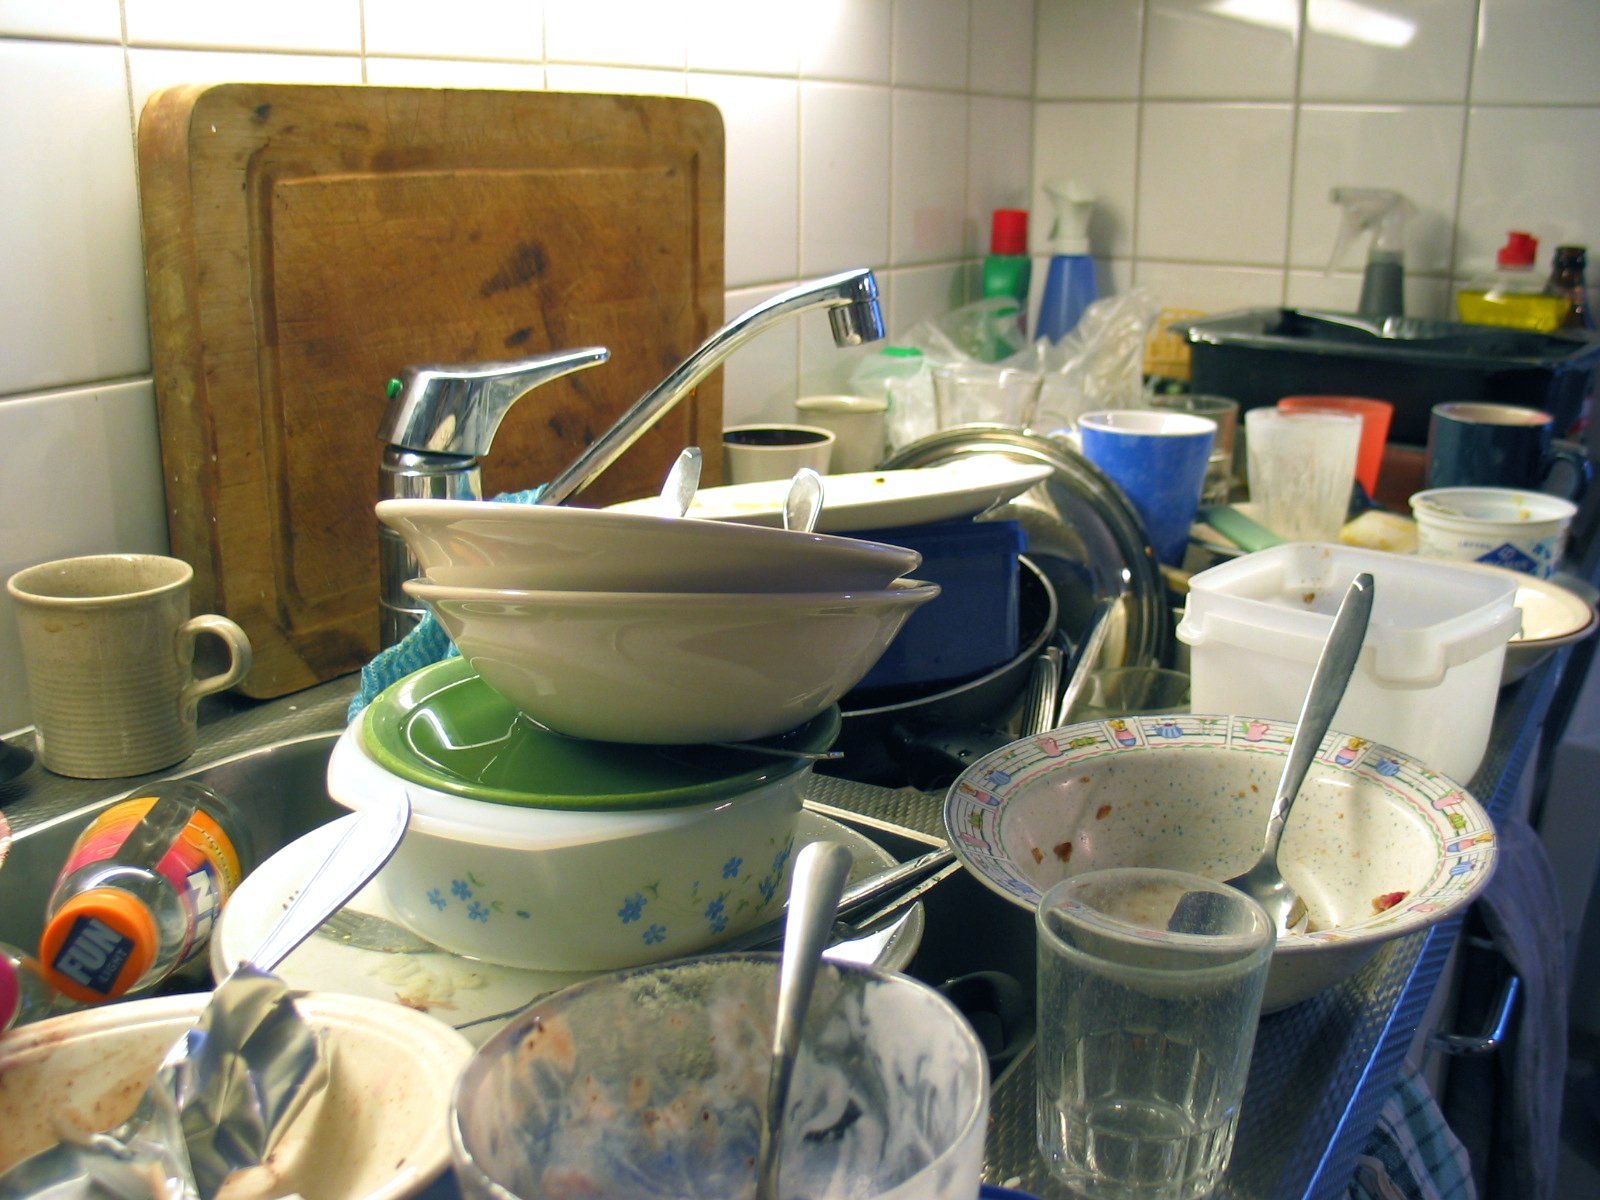 A sink full of dirty dishes.